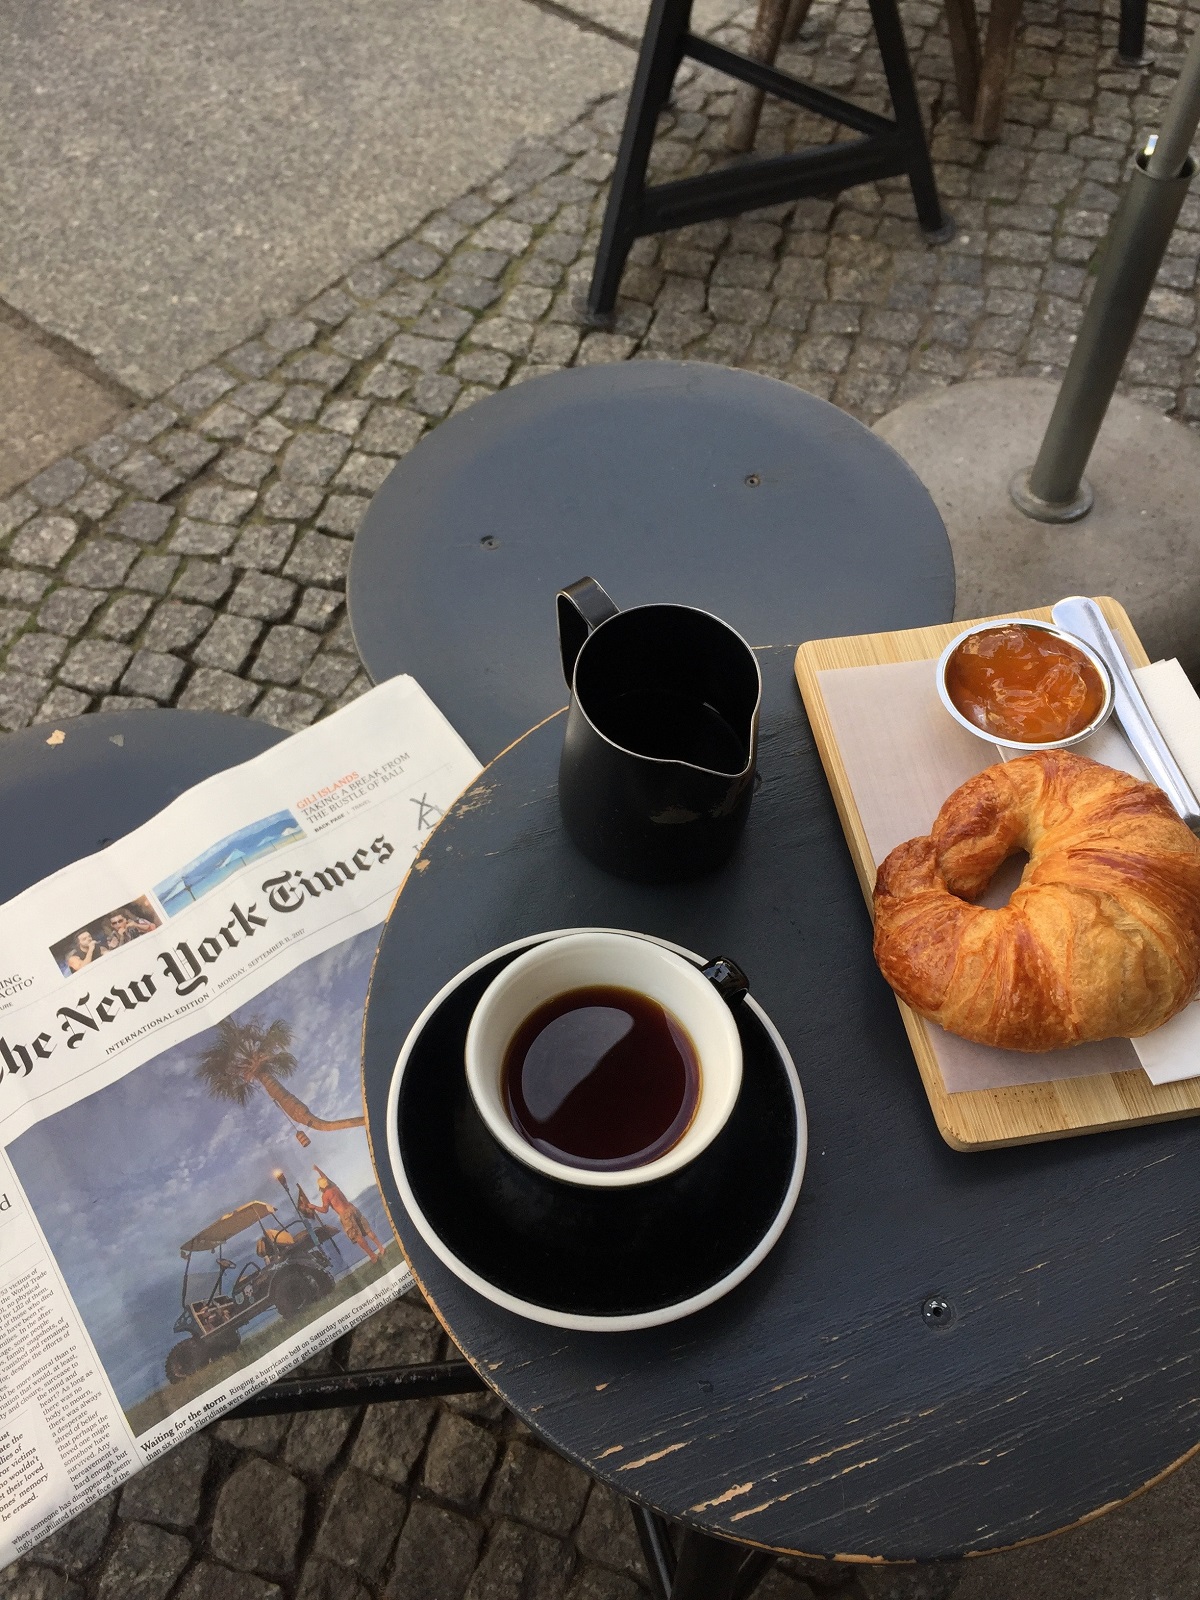 Croissant and a black coffee at an outdoor table with the New York Times newspaper